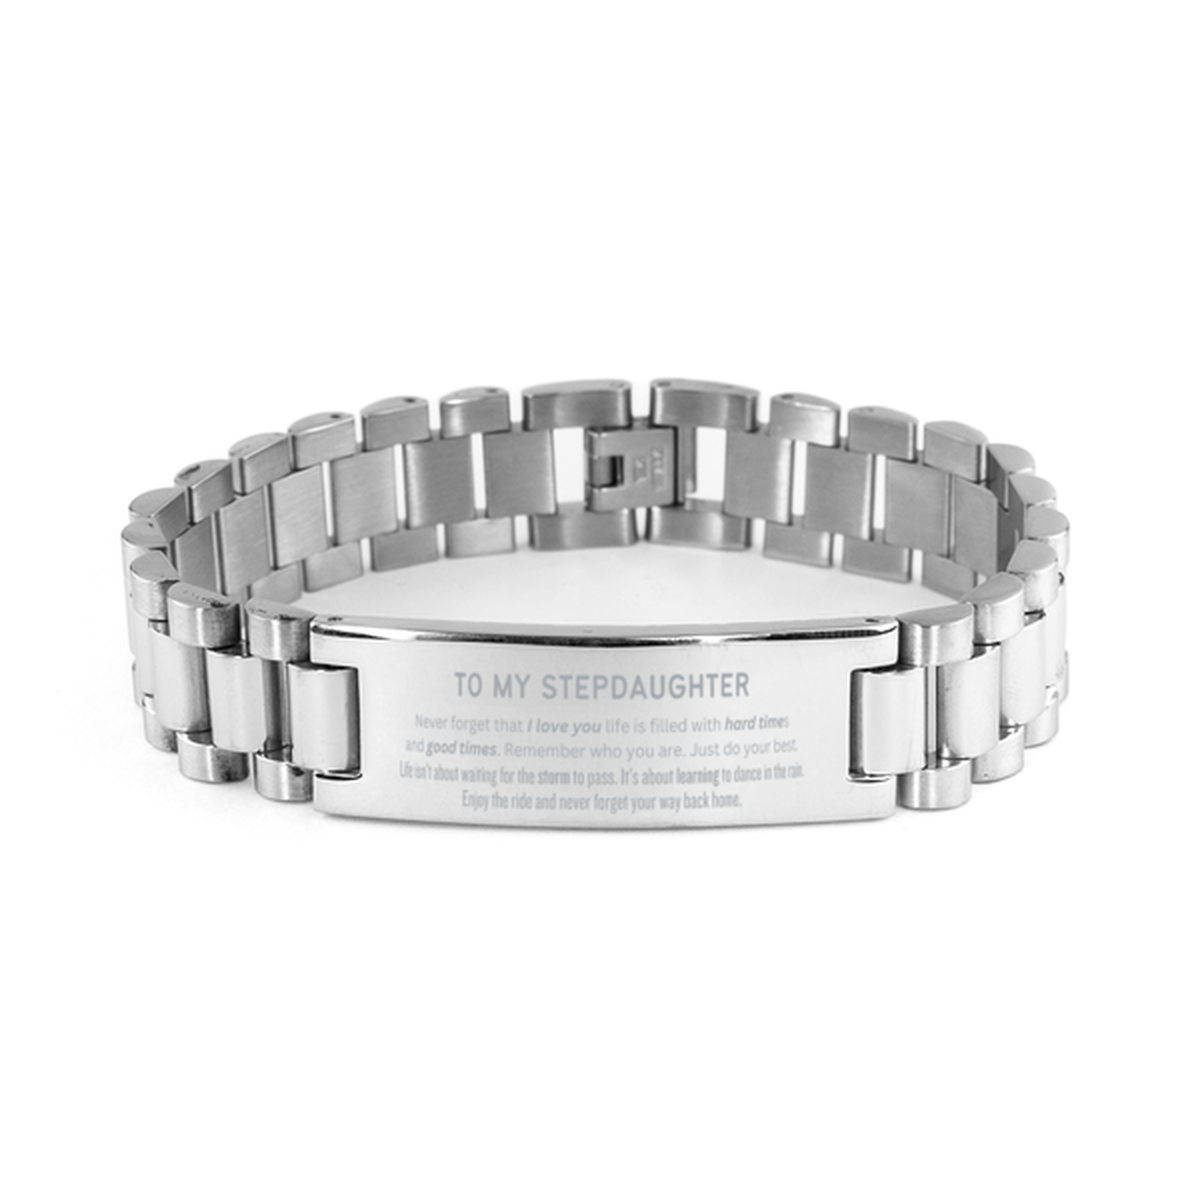 Christmas Stepdaughter Ladder Stainless Steel Bracelet Gifts, To My Stepdaughter Birthday Thank You Gifts For Stepdaughter, Graduation Unique Gifts For Stepdaughter To My Stepdaughter Never forget that I love you life is filled with hard times and good ti